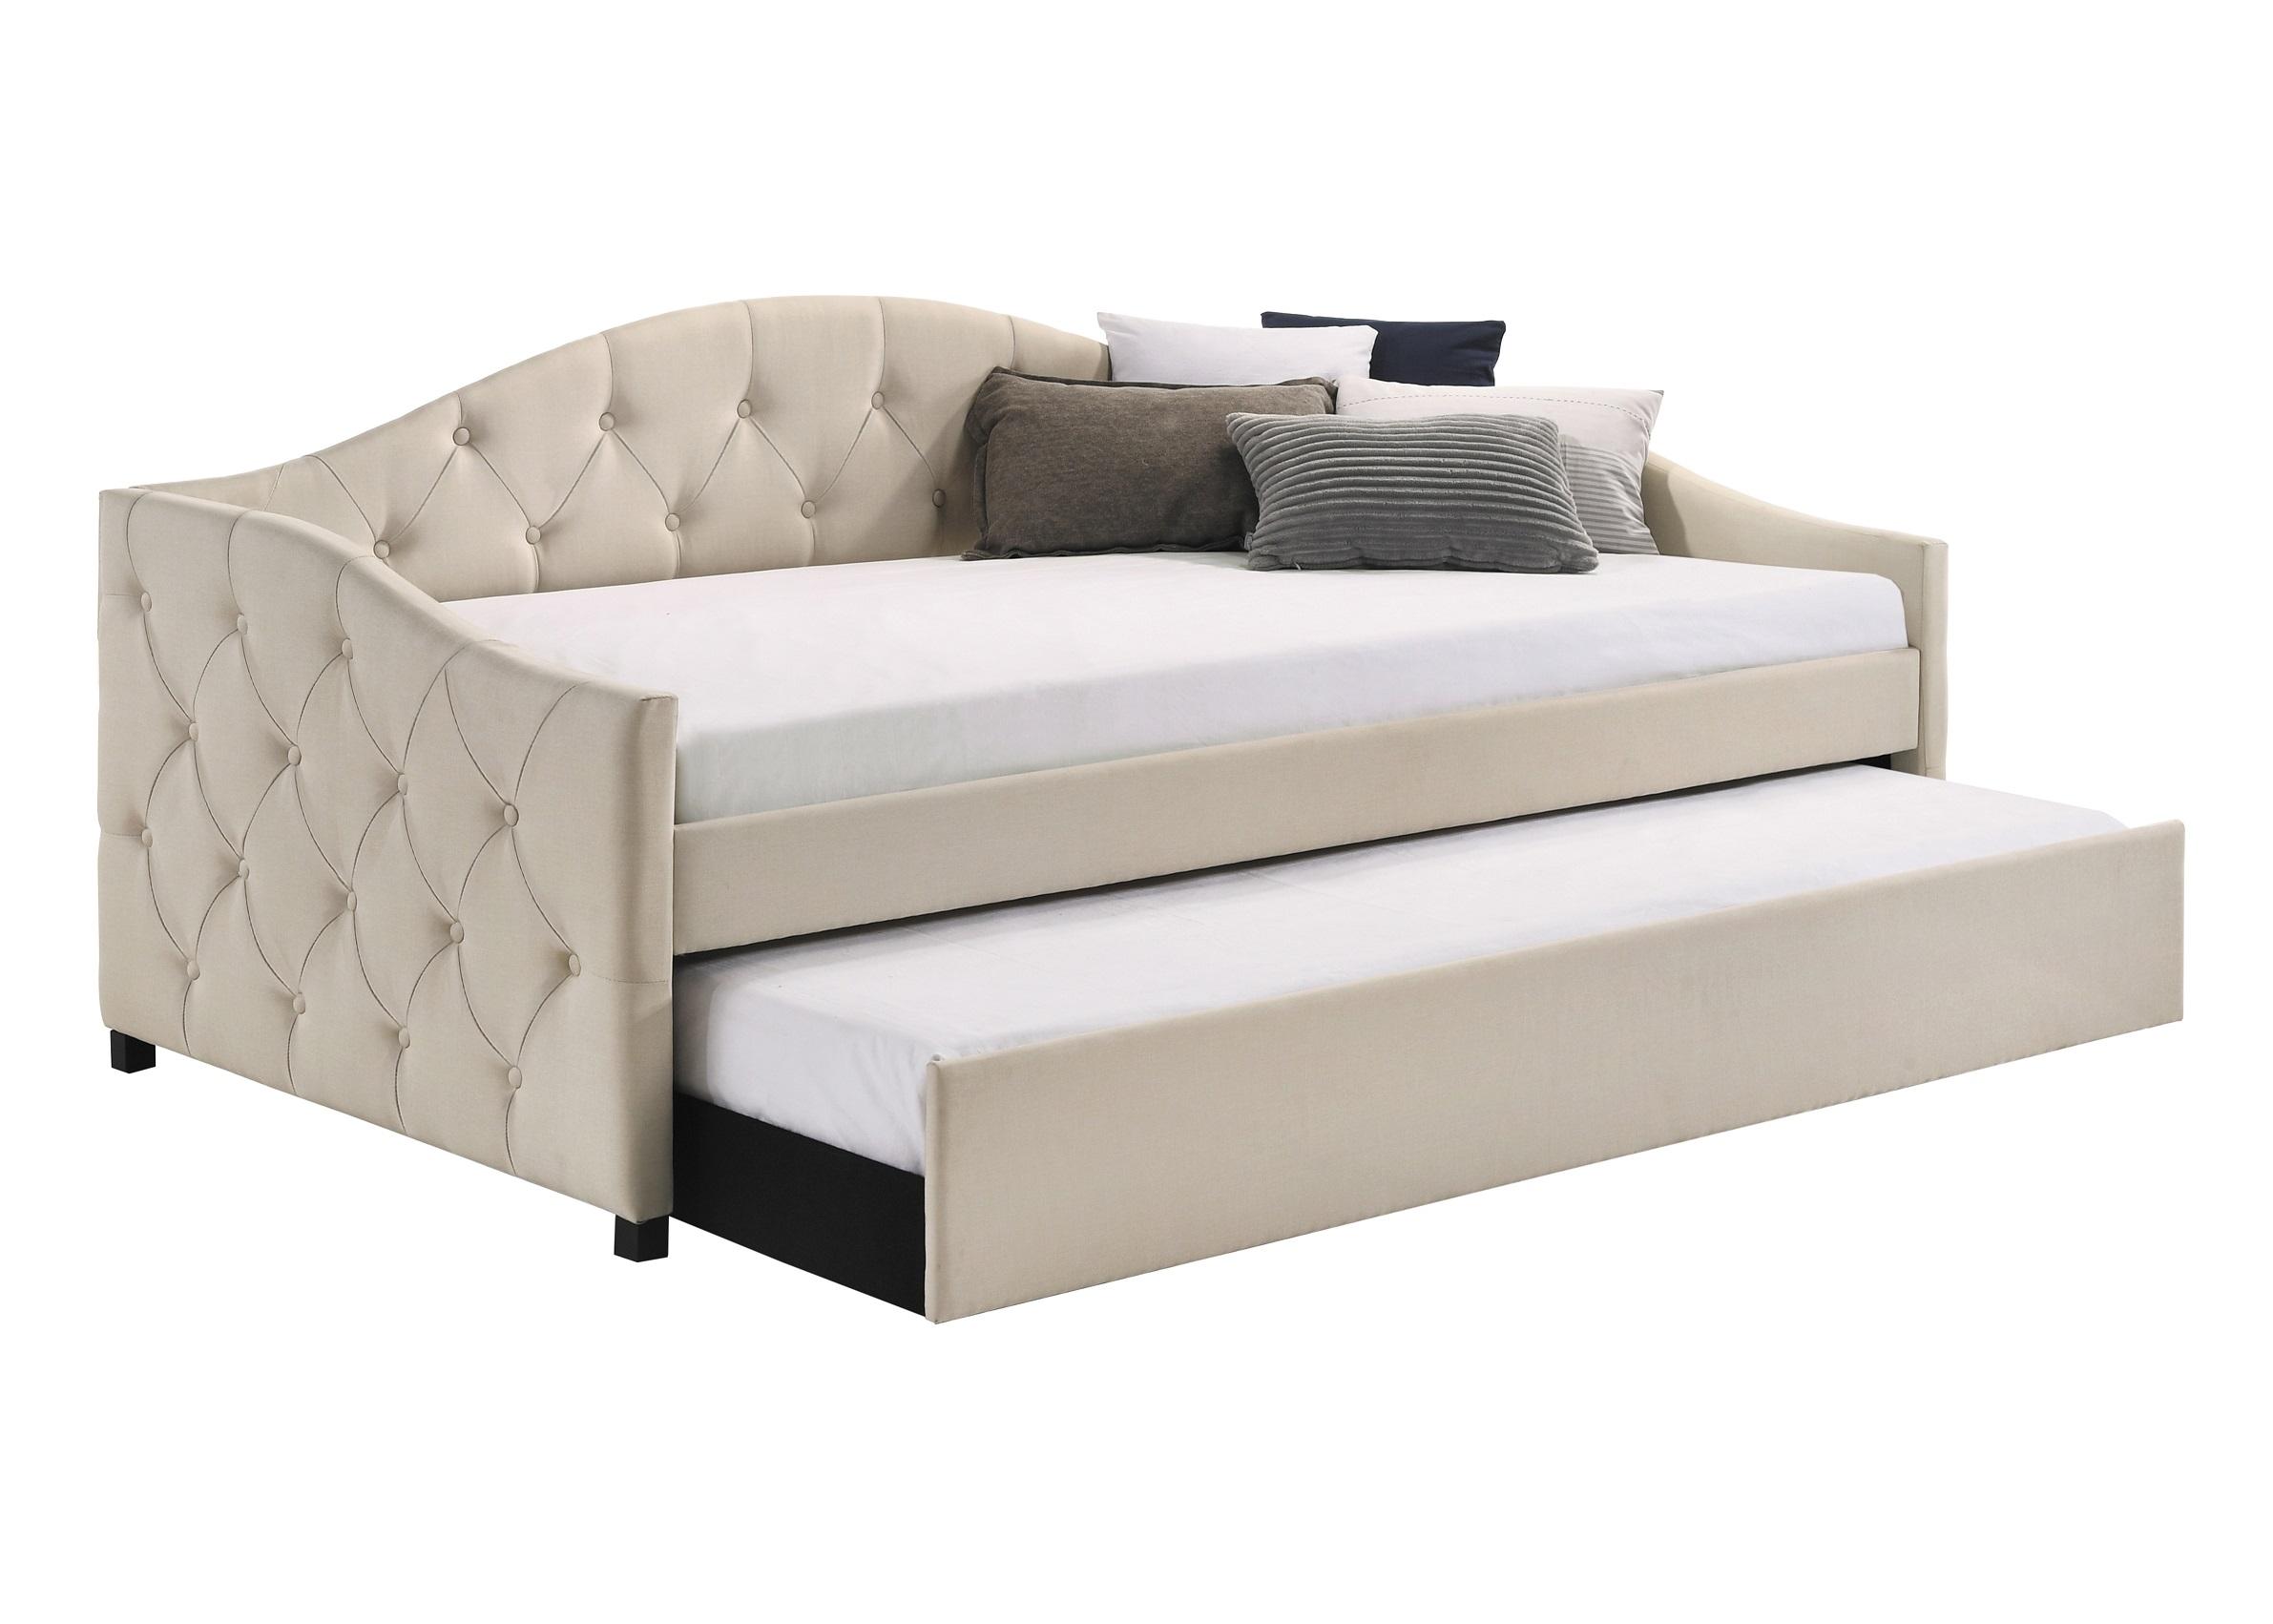 Transitional Daybed w/Trundle 300639 Sadie 300639 in Taupe 